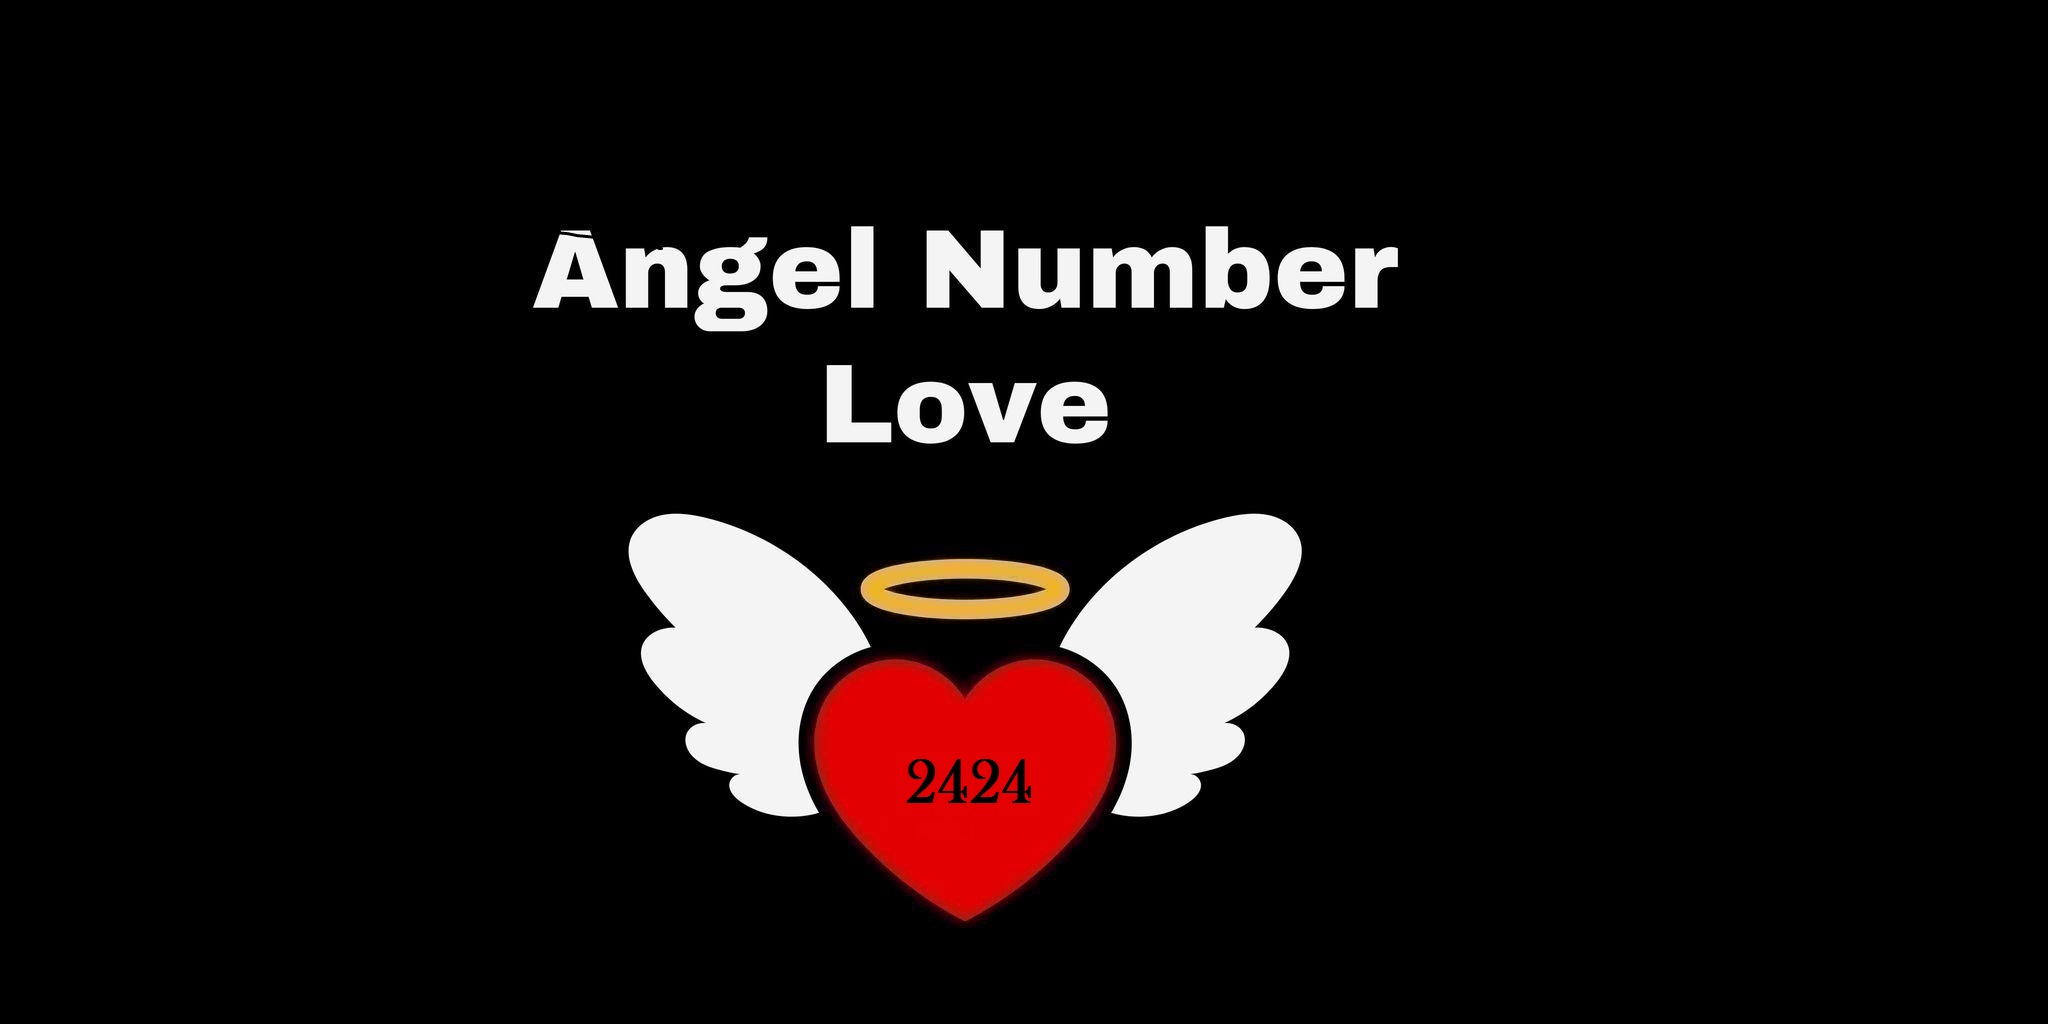 2424 Angel Number Meaning In Love